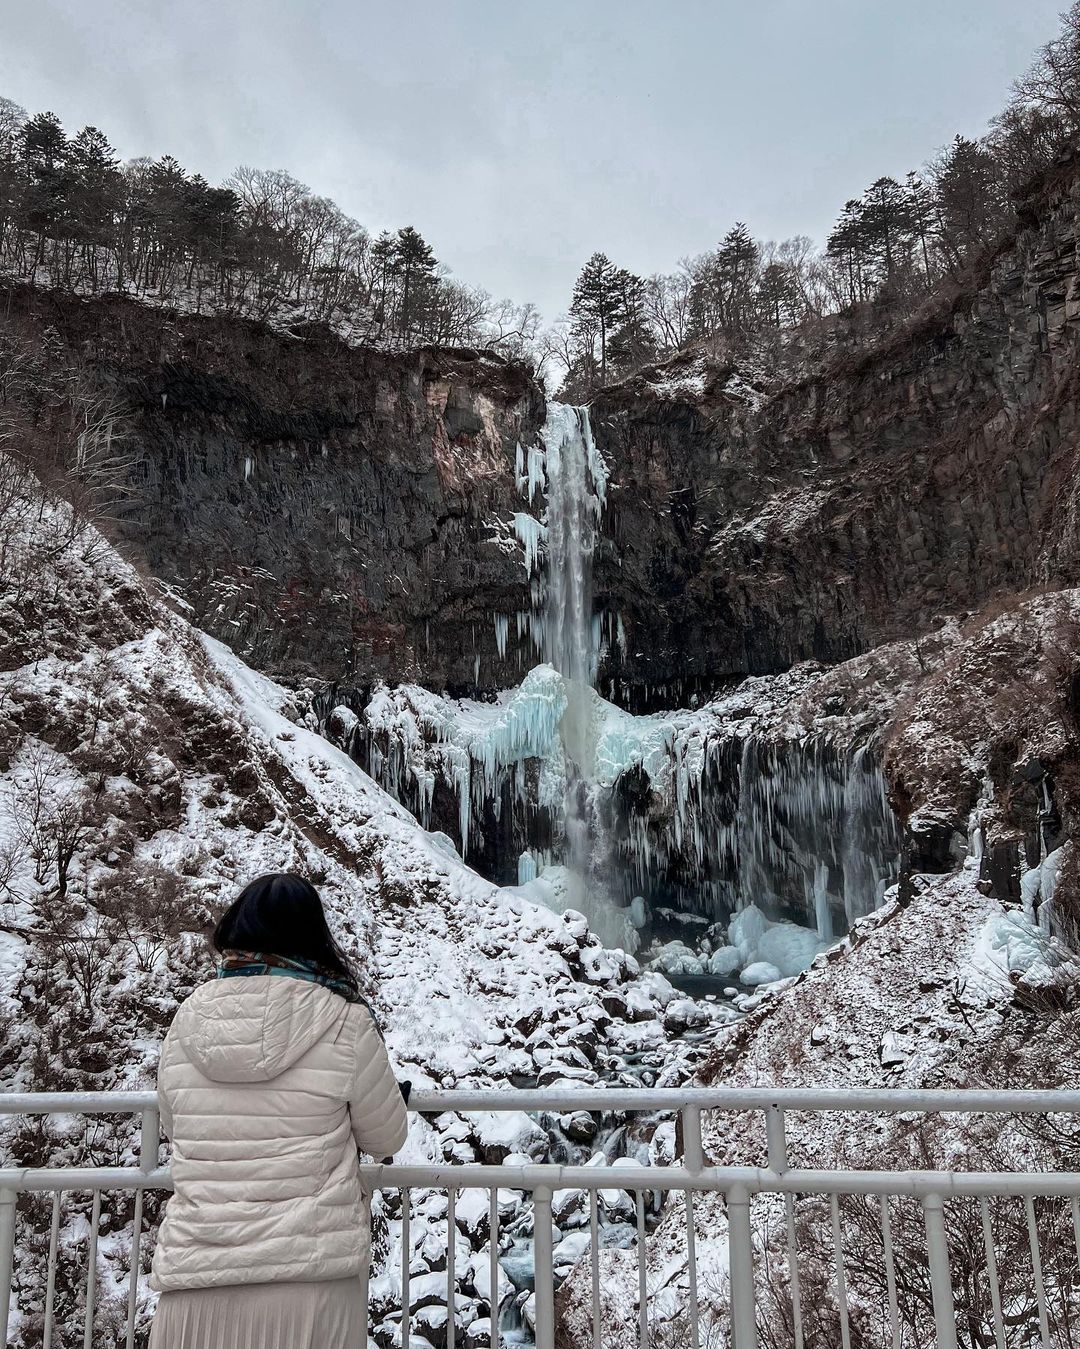 Cities in Japan to see snow - visitor staring at the frozen Kegon Waterfall